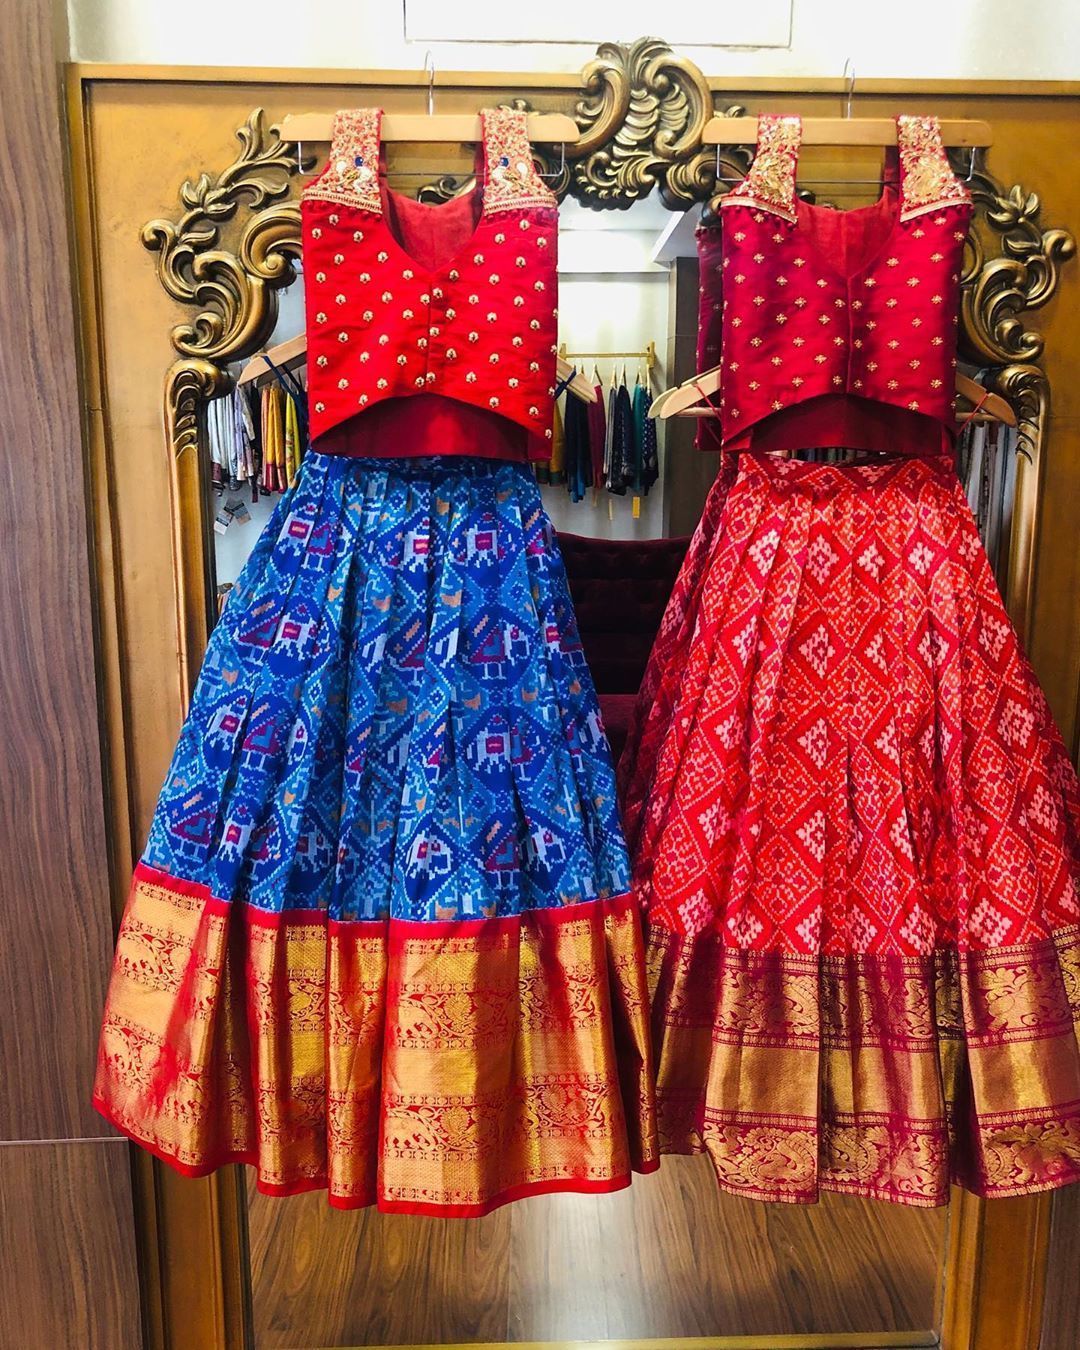 Bangalore Lehenga Shopping Guide + Saree Labels & White Wedding Gowns - Frugal2Fab -   17 wedding style Guides ideas